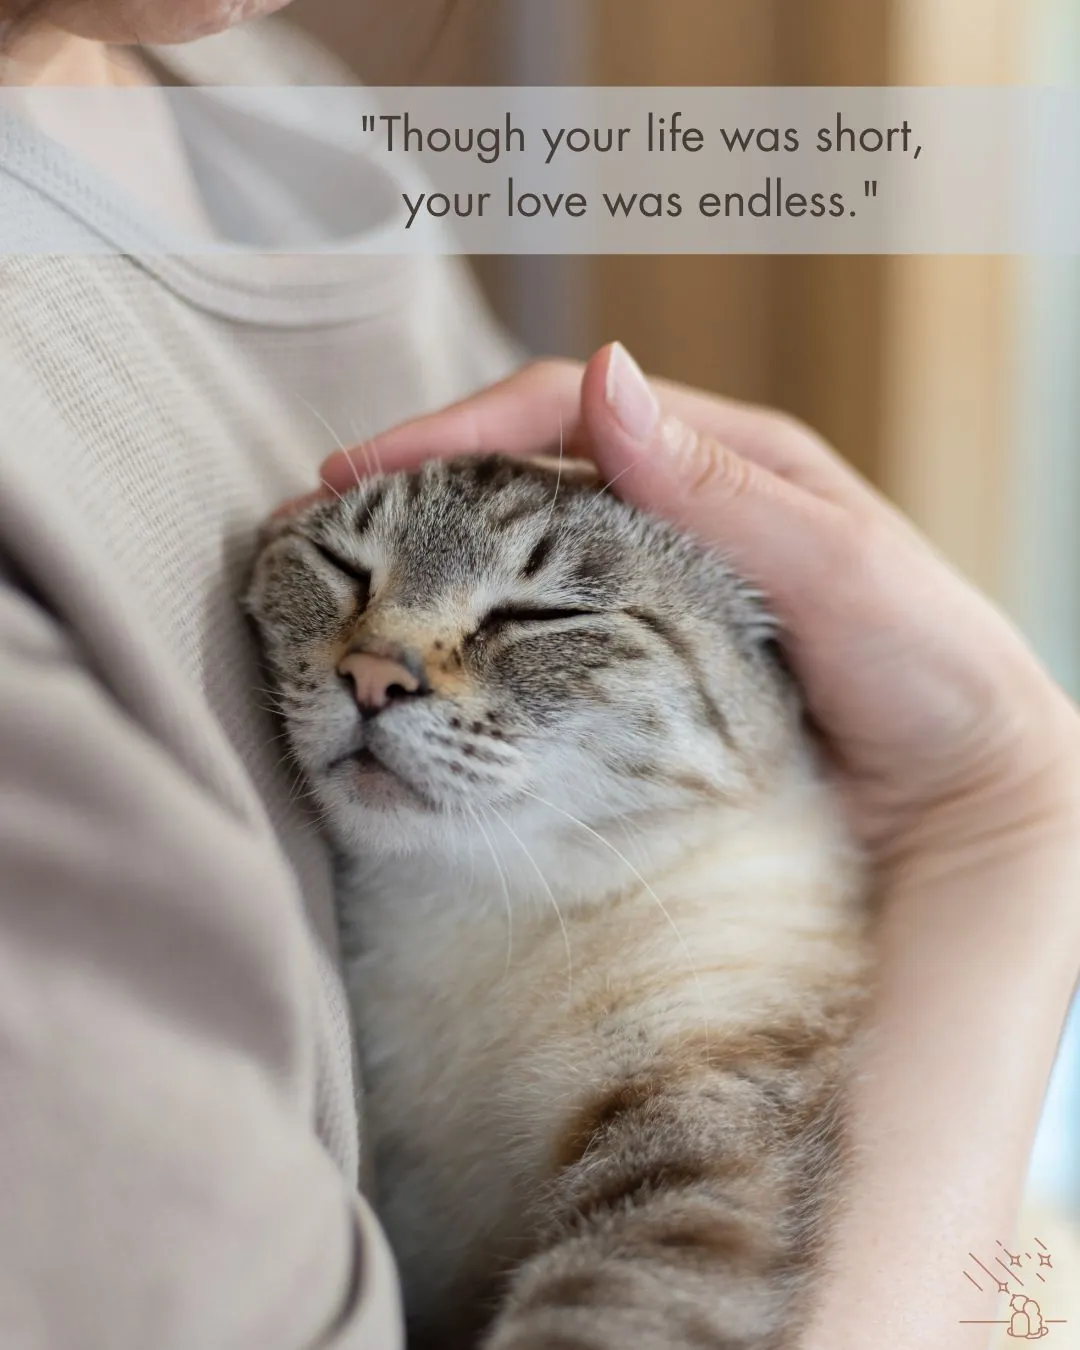 Pet Loss Quotes for Cat Image (2)